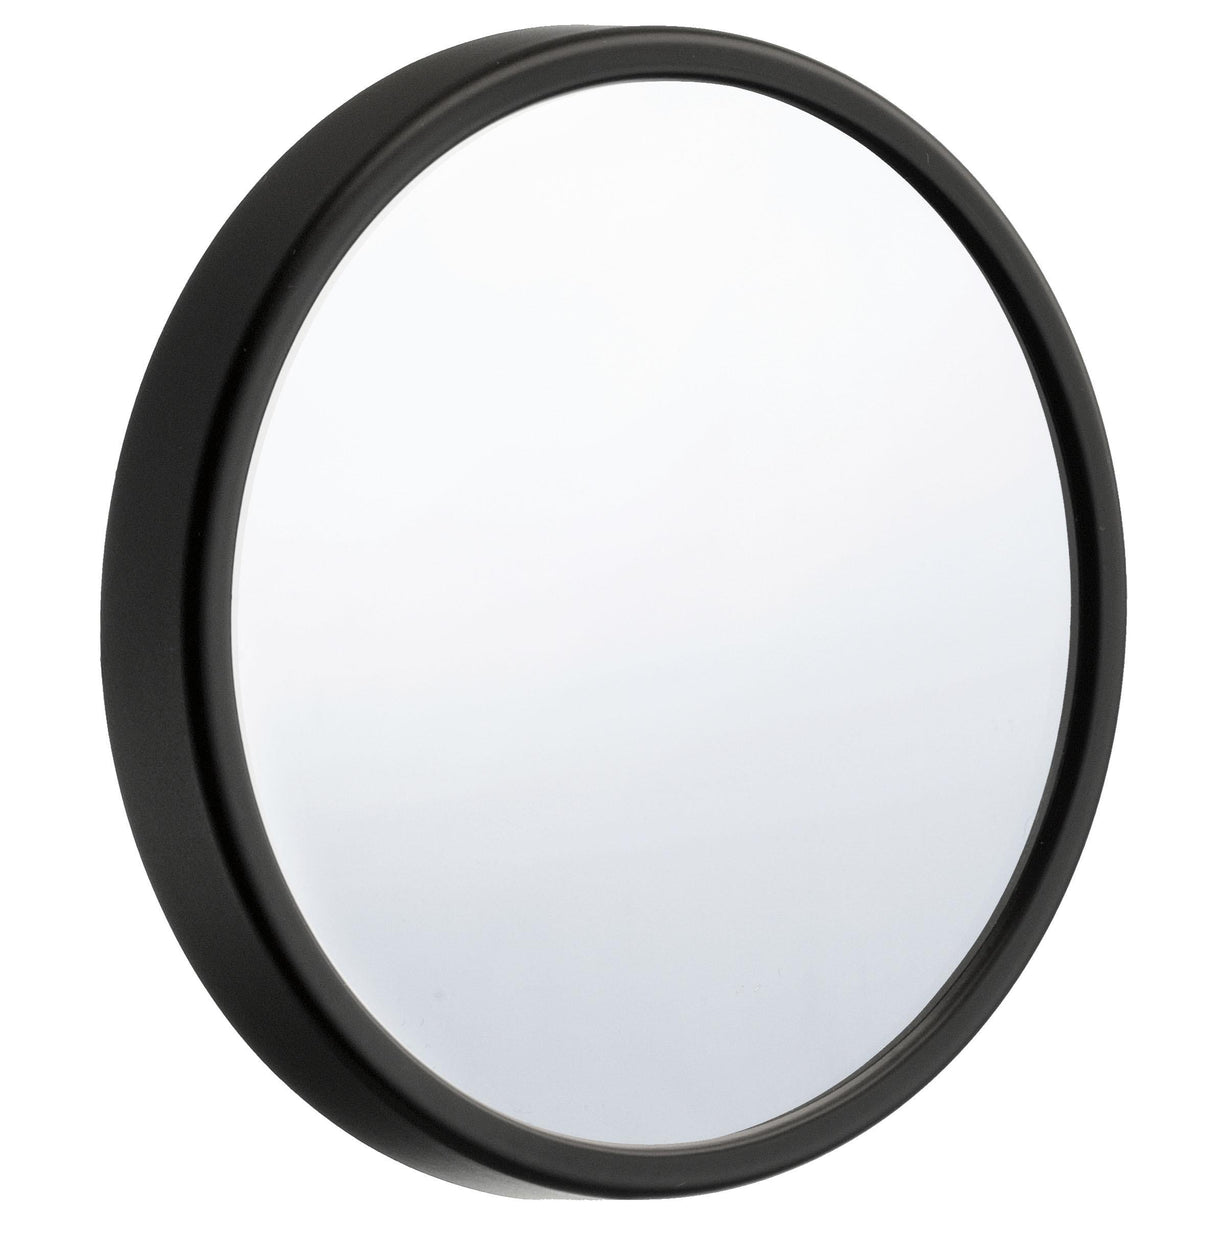 Smedbo Outline Lite Make-up Mirror with Suction Cups x12 Magnification in Matte Black